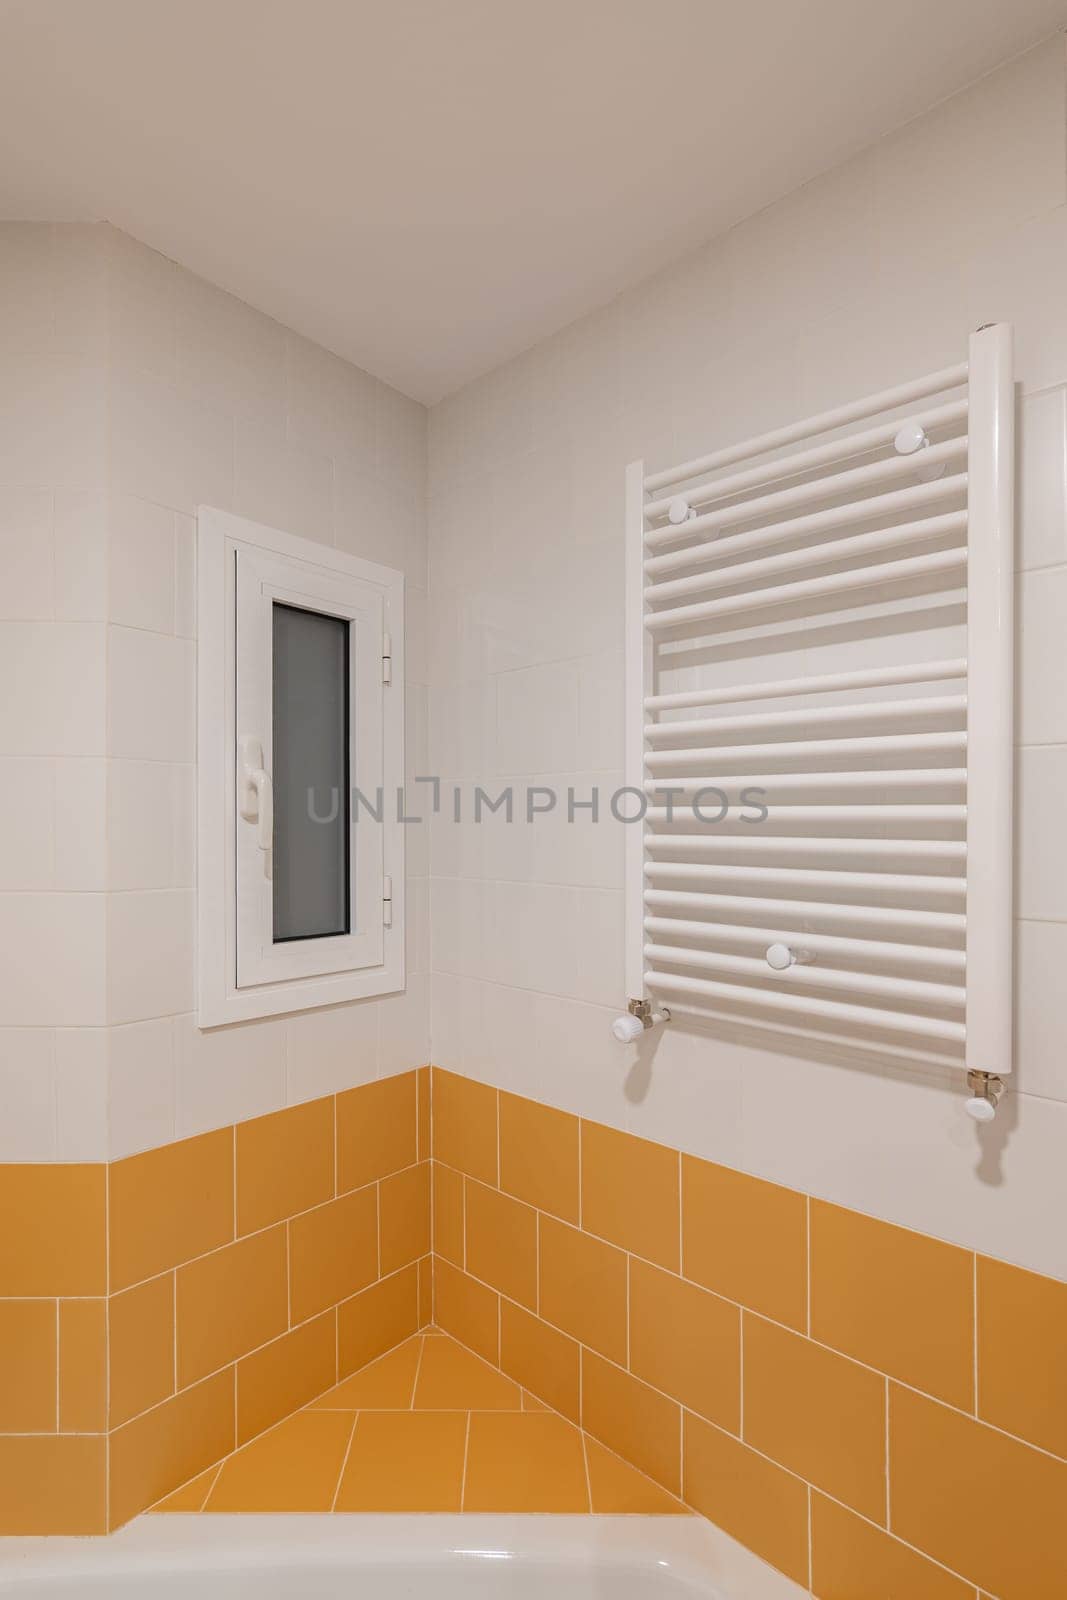 Bathroom with yellow tiles and white towel rack